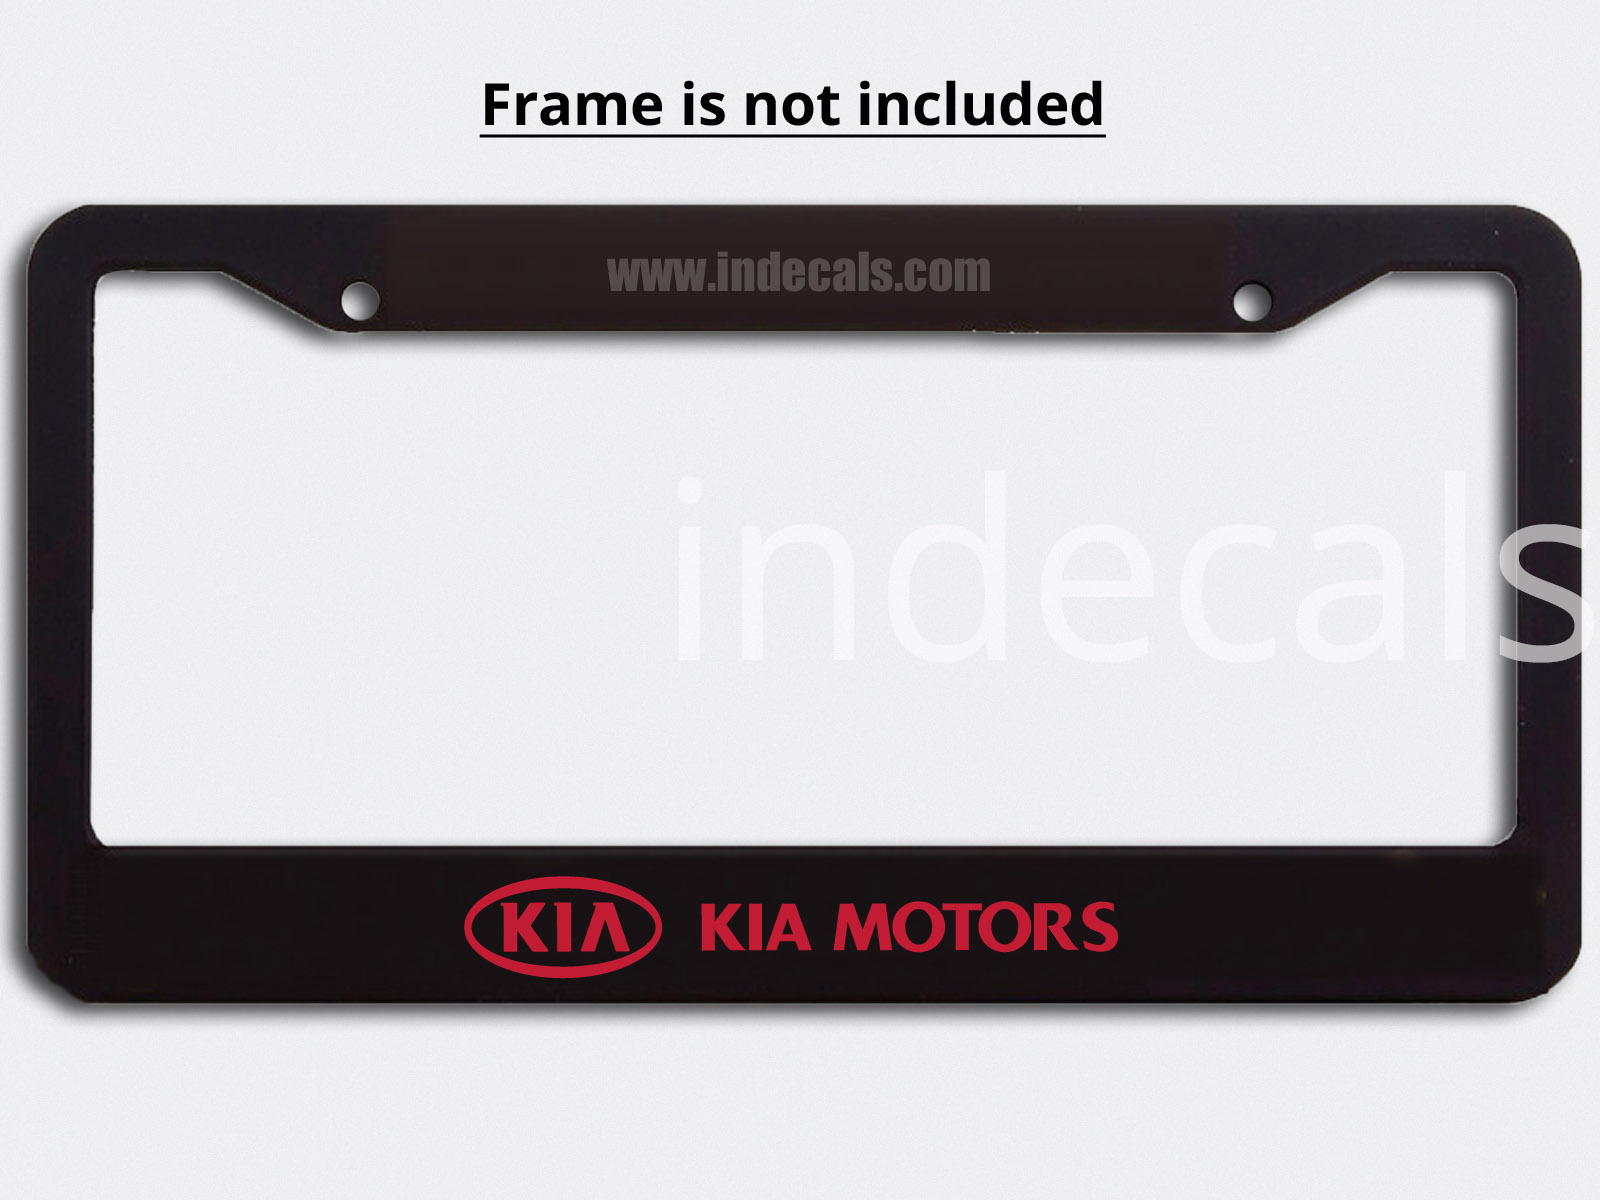 3 x Kia Stickers for Plate Frame - Red